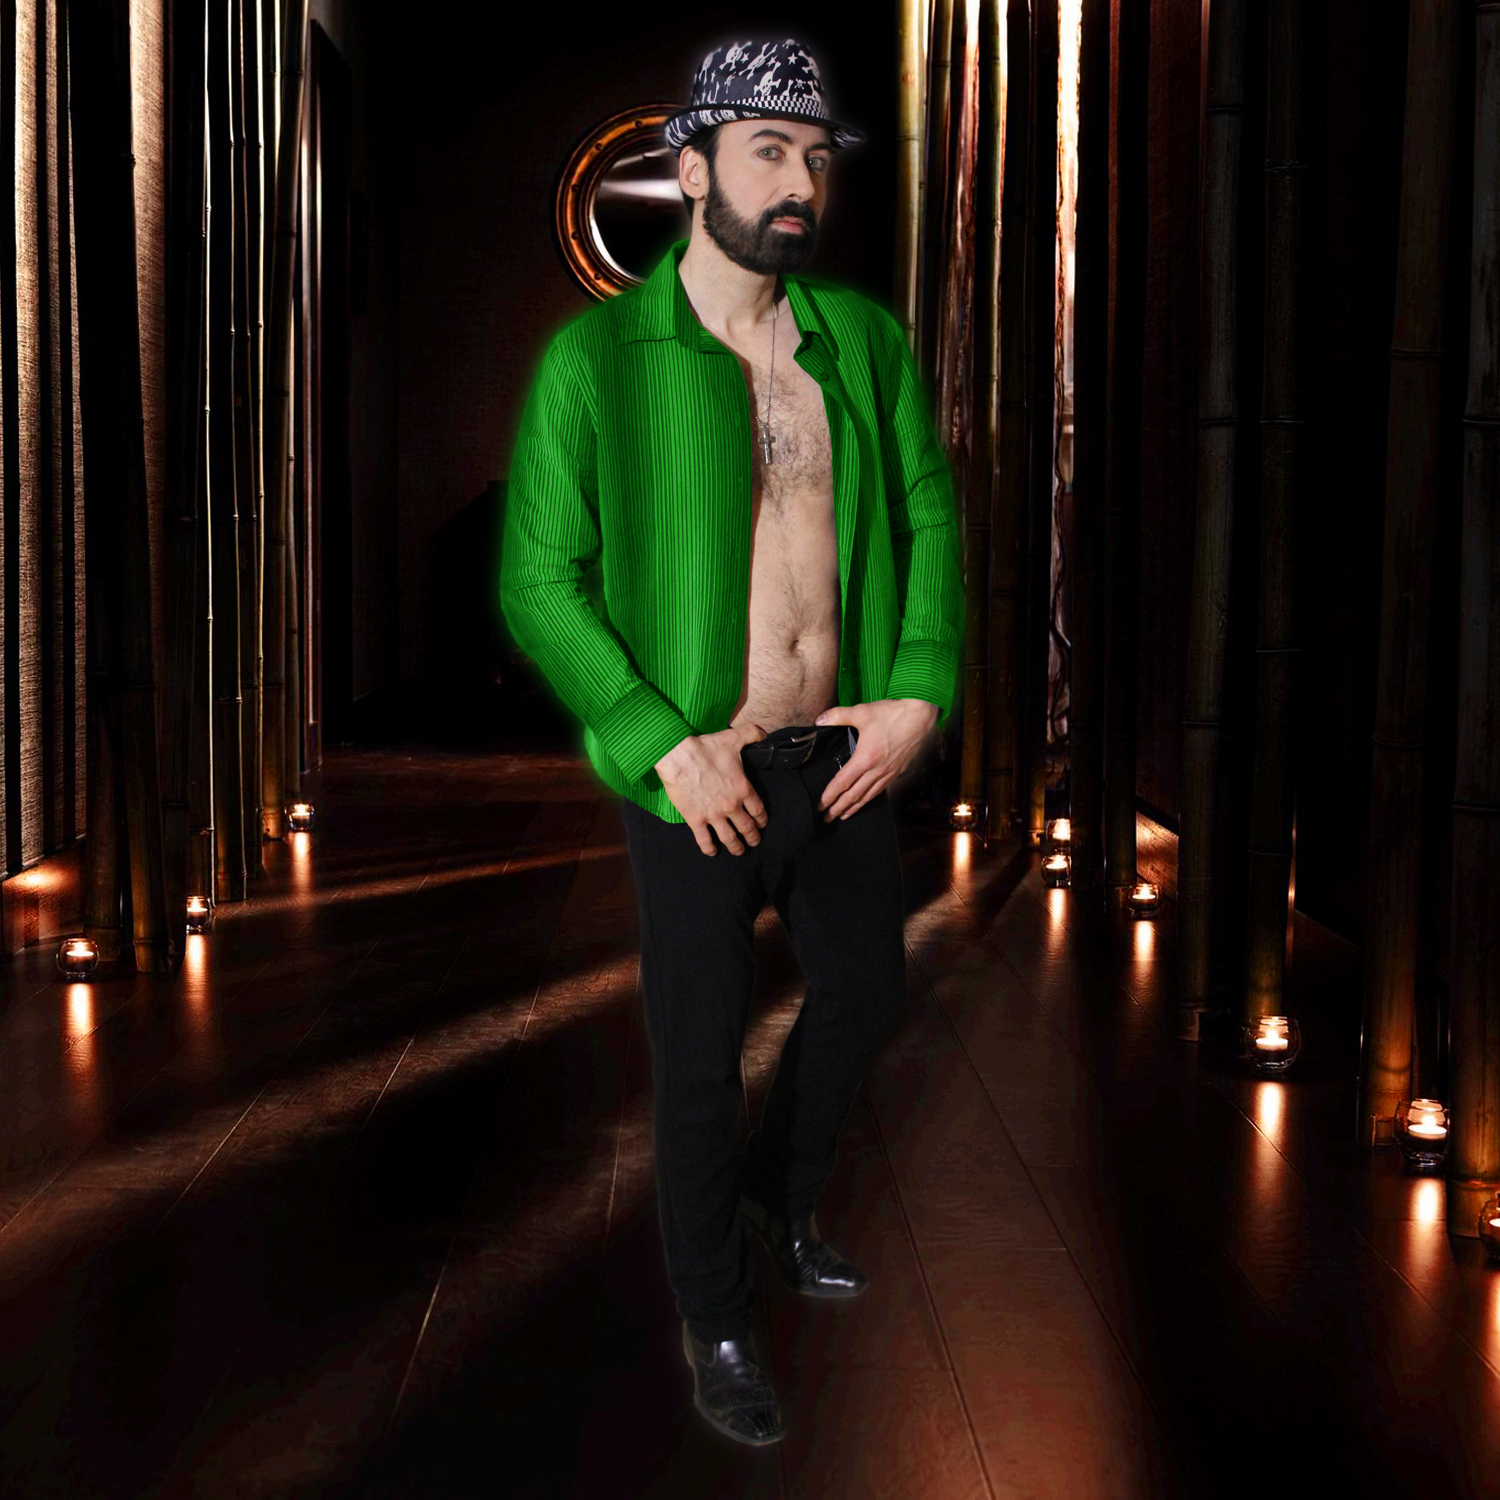 In the corridor of my aspirations, I always have 1 very precise direction. #MyLife #Documented #MoonDazeTV #RealityShow #Season03